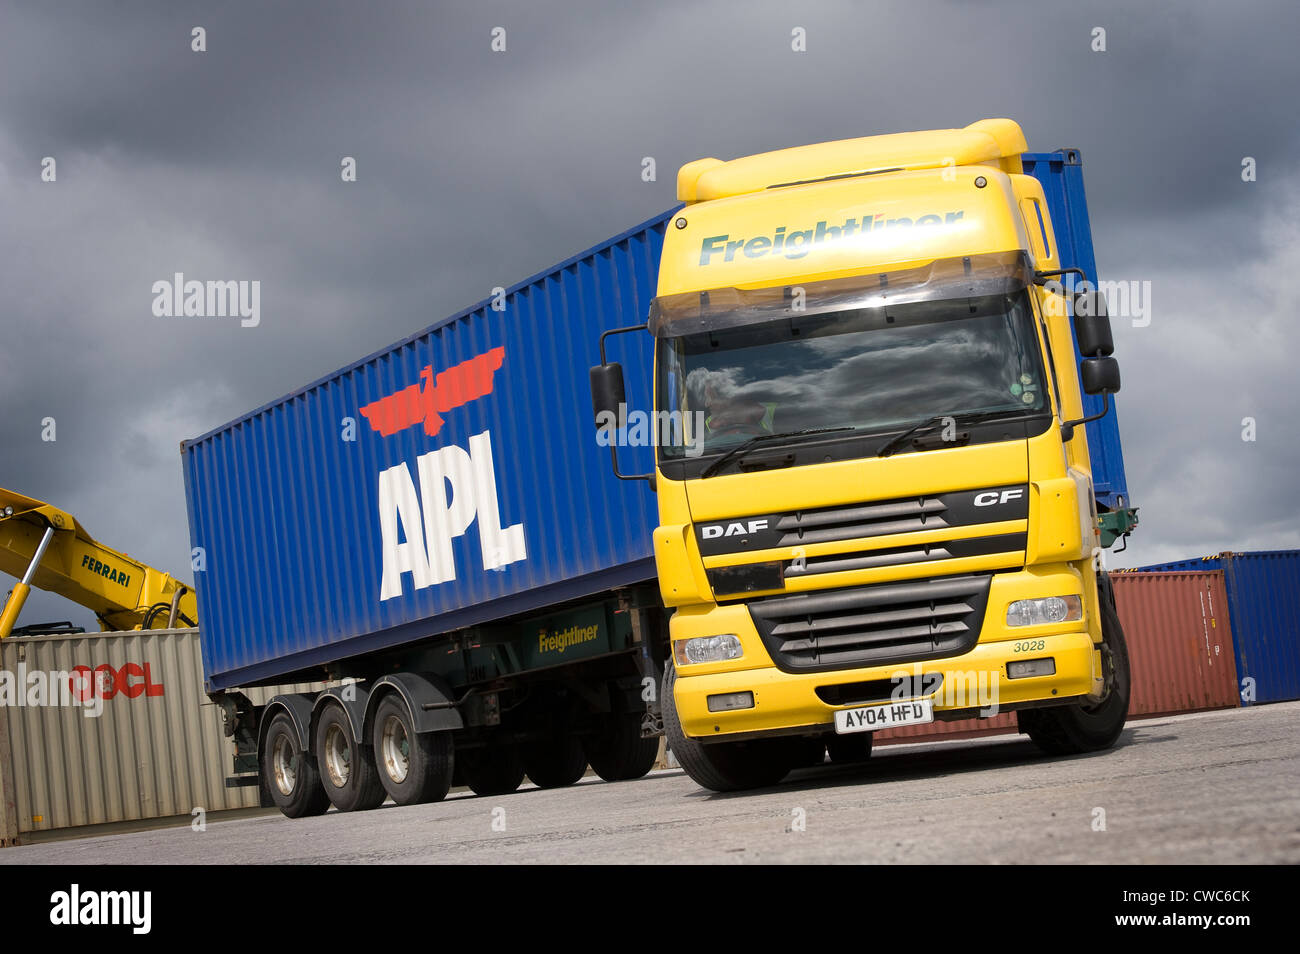 DAF lorry in freightliner livery about to leave a railway depot hauling a large shipping container. Stock Photo